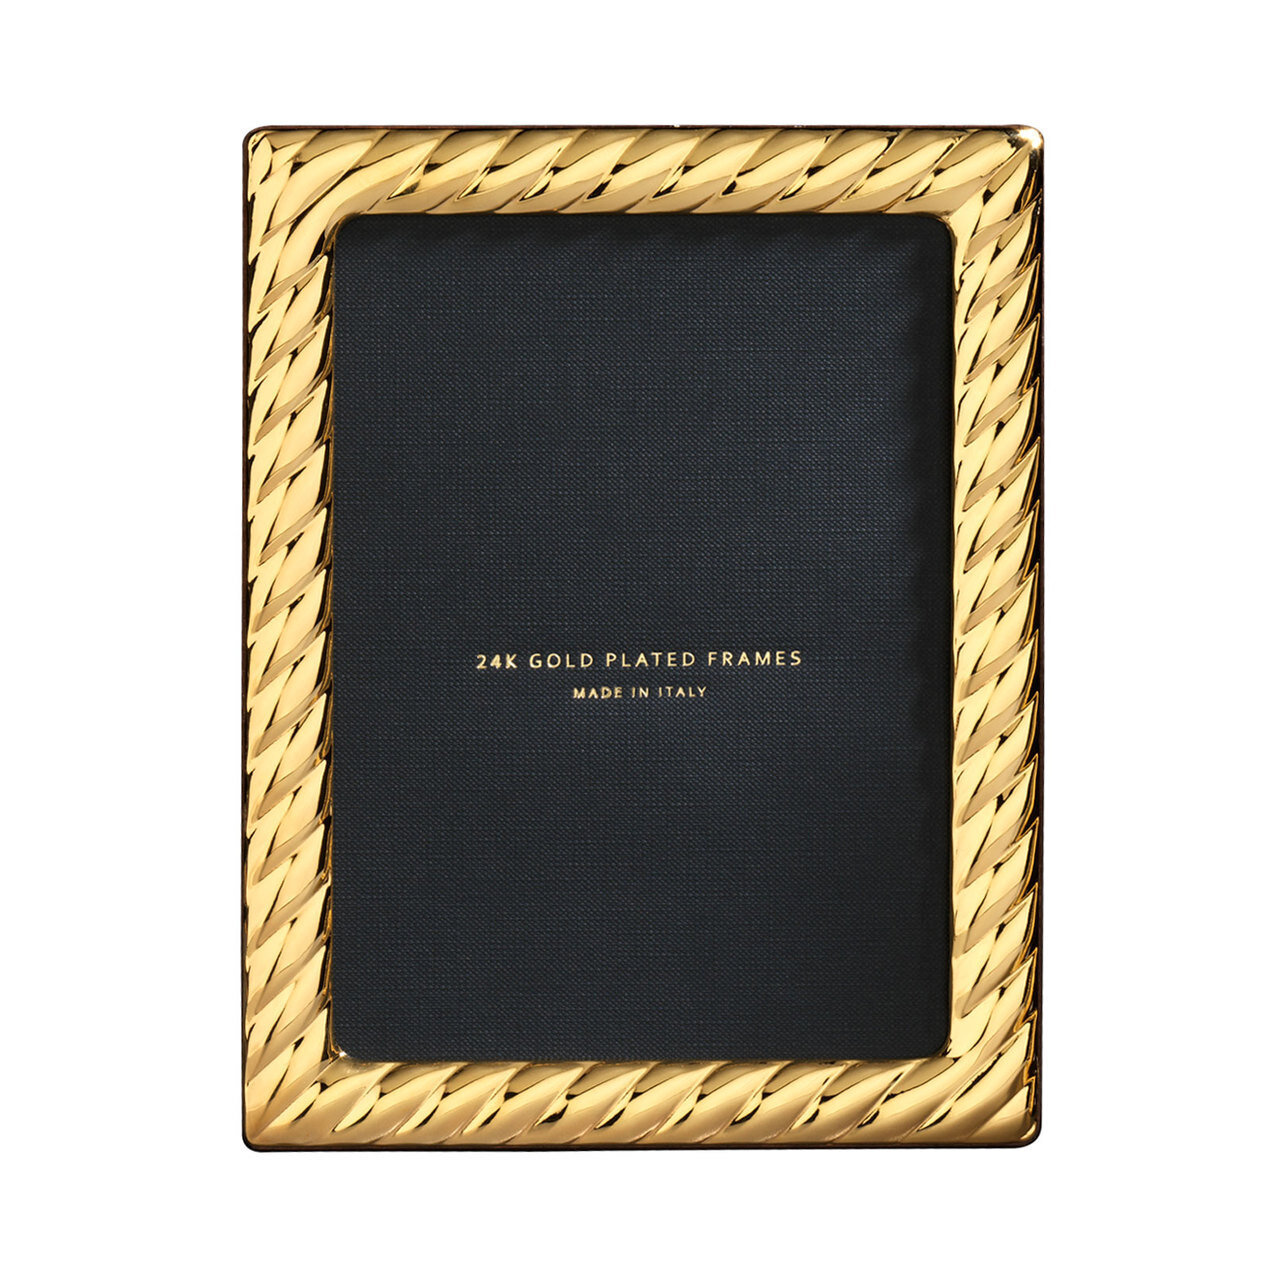 Cunill Picasso 8 x 10 Inch Picture Frame - 24k Gold Plated 0.5 Microns